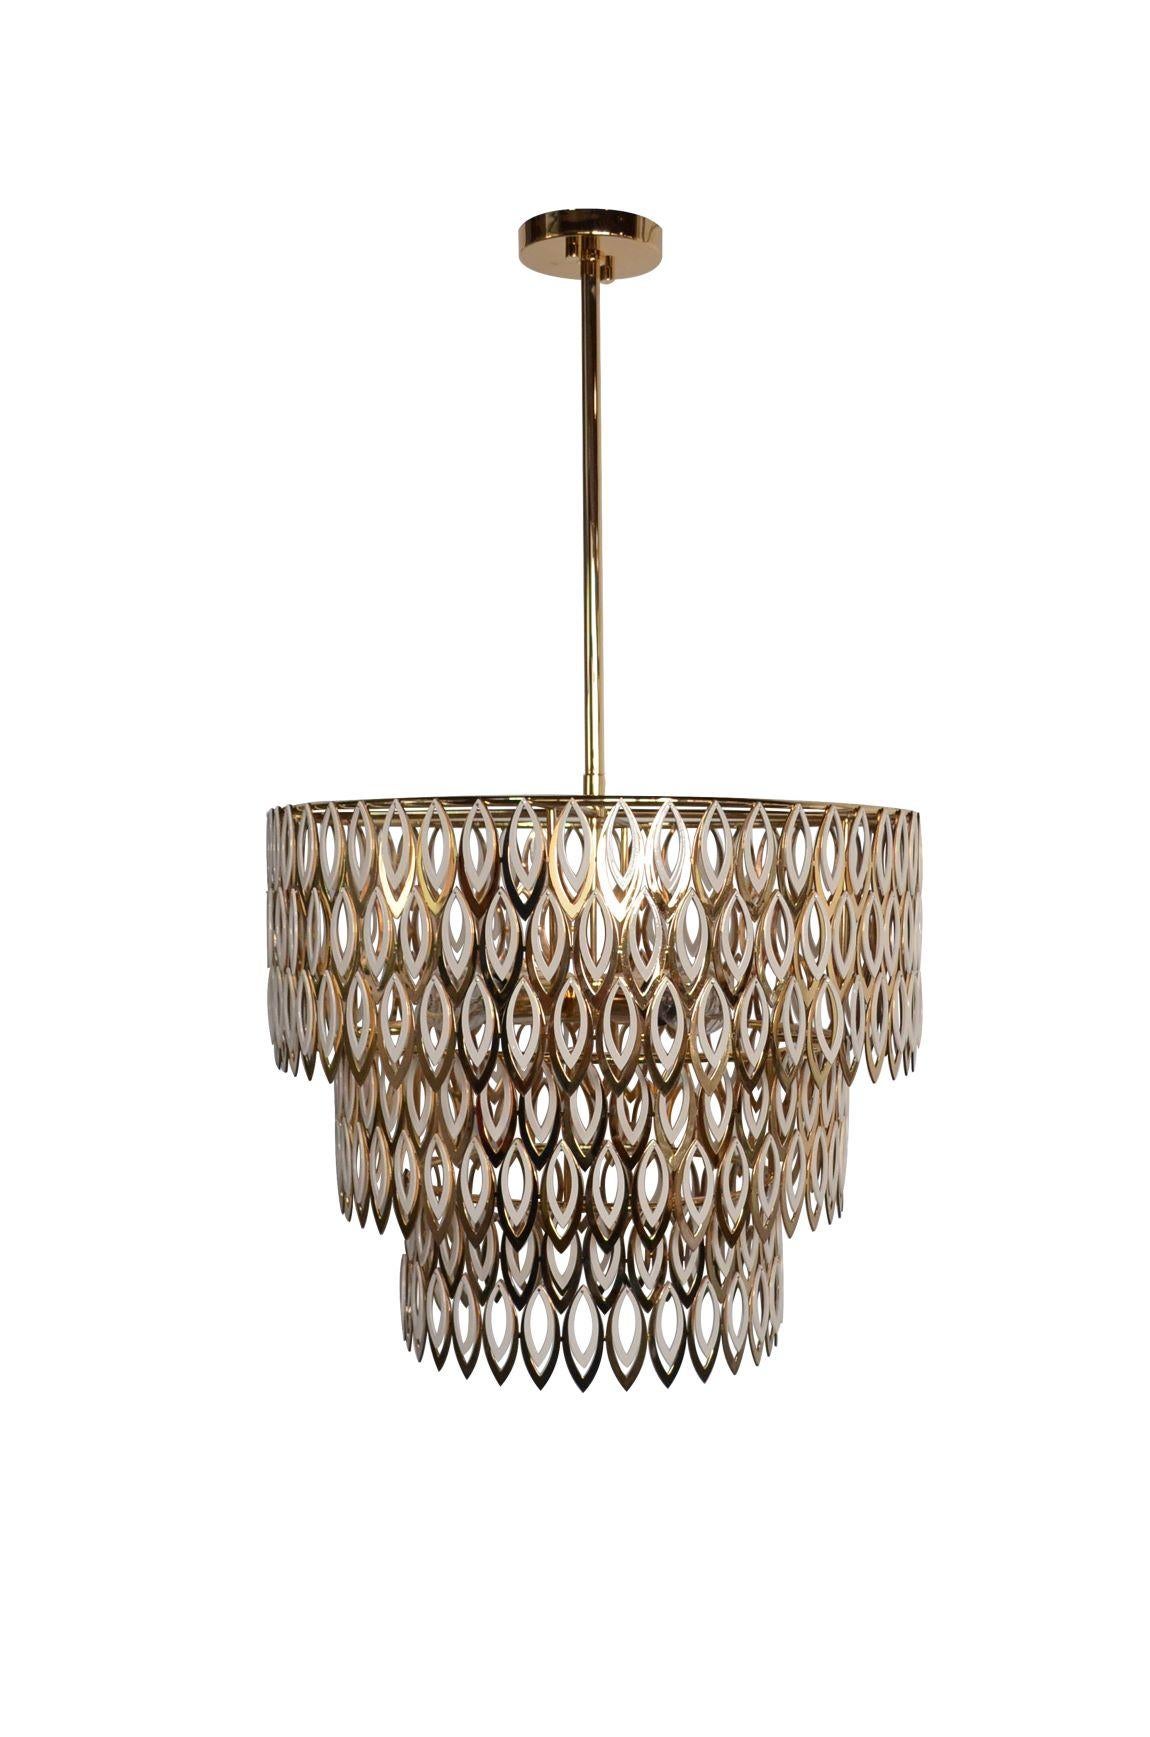 Portuguese 21st Century Petal Suspension Lamp Stainless Steel For Sale